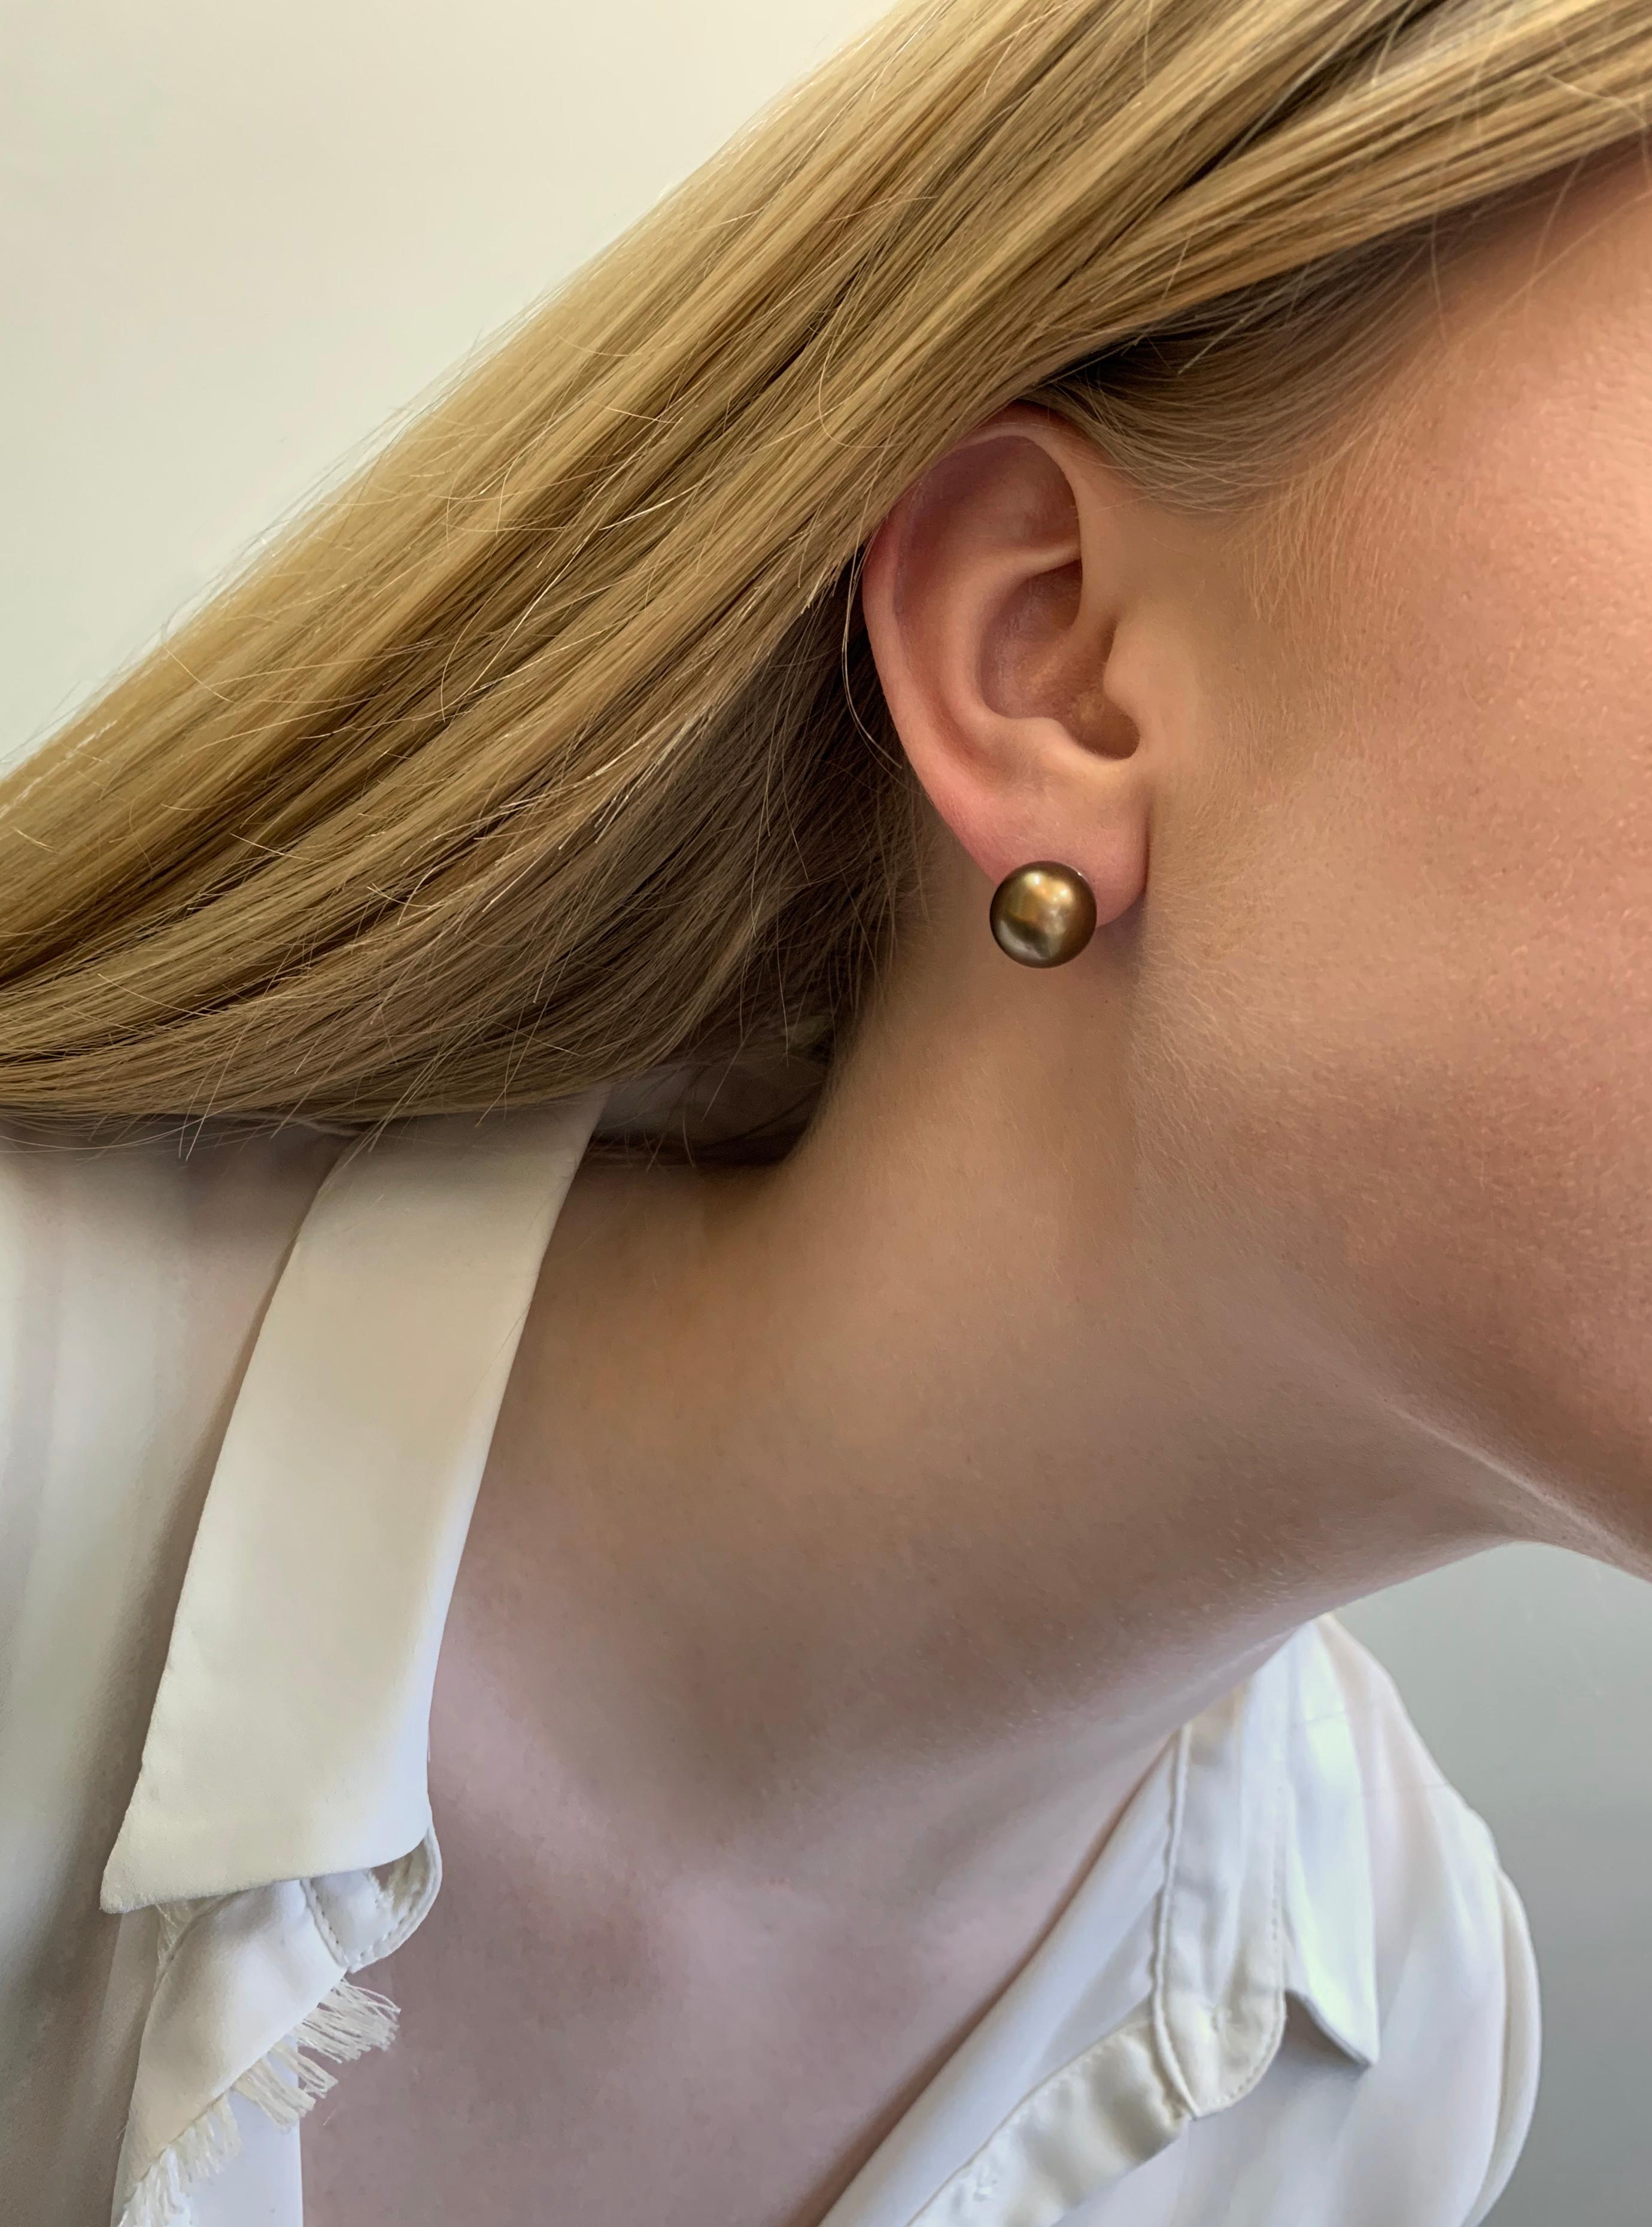 These striking earrings from Yoko London feature Chocolate-coloured Tahitian pearls, offering a unique twist to an otherwise classic design. Set in 18 Karat Yellow Gold to enrich the rich, sumptuous colour of the pearls, these earrings make a